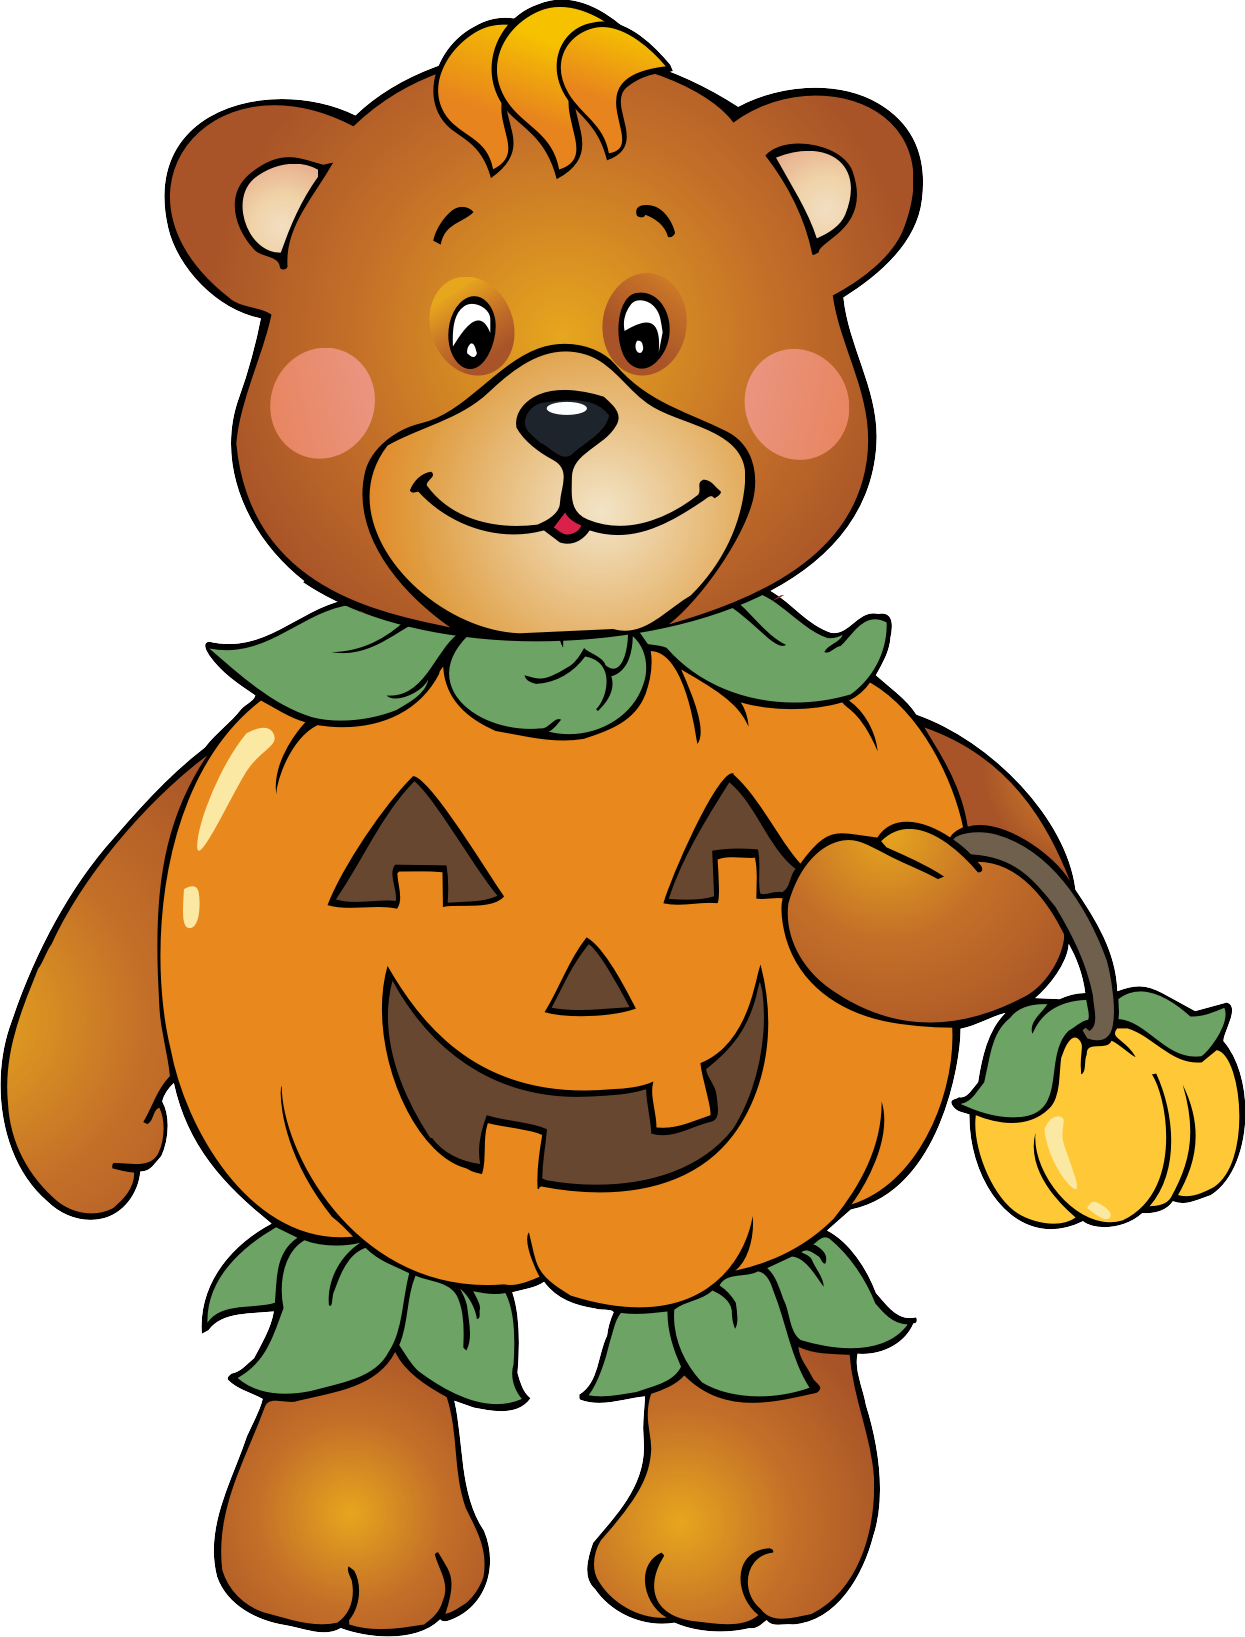 Free halloween halloween clipart free clipart images 2 - Clipartix